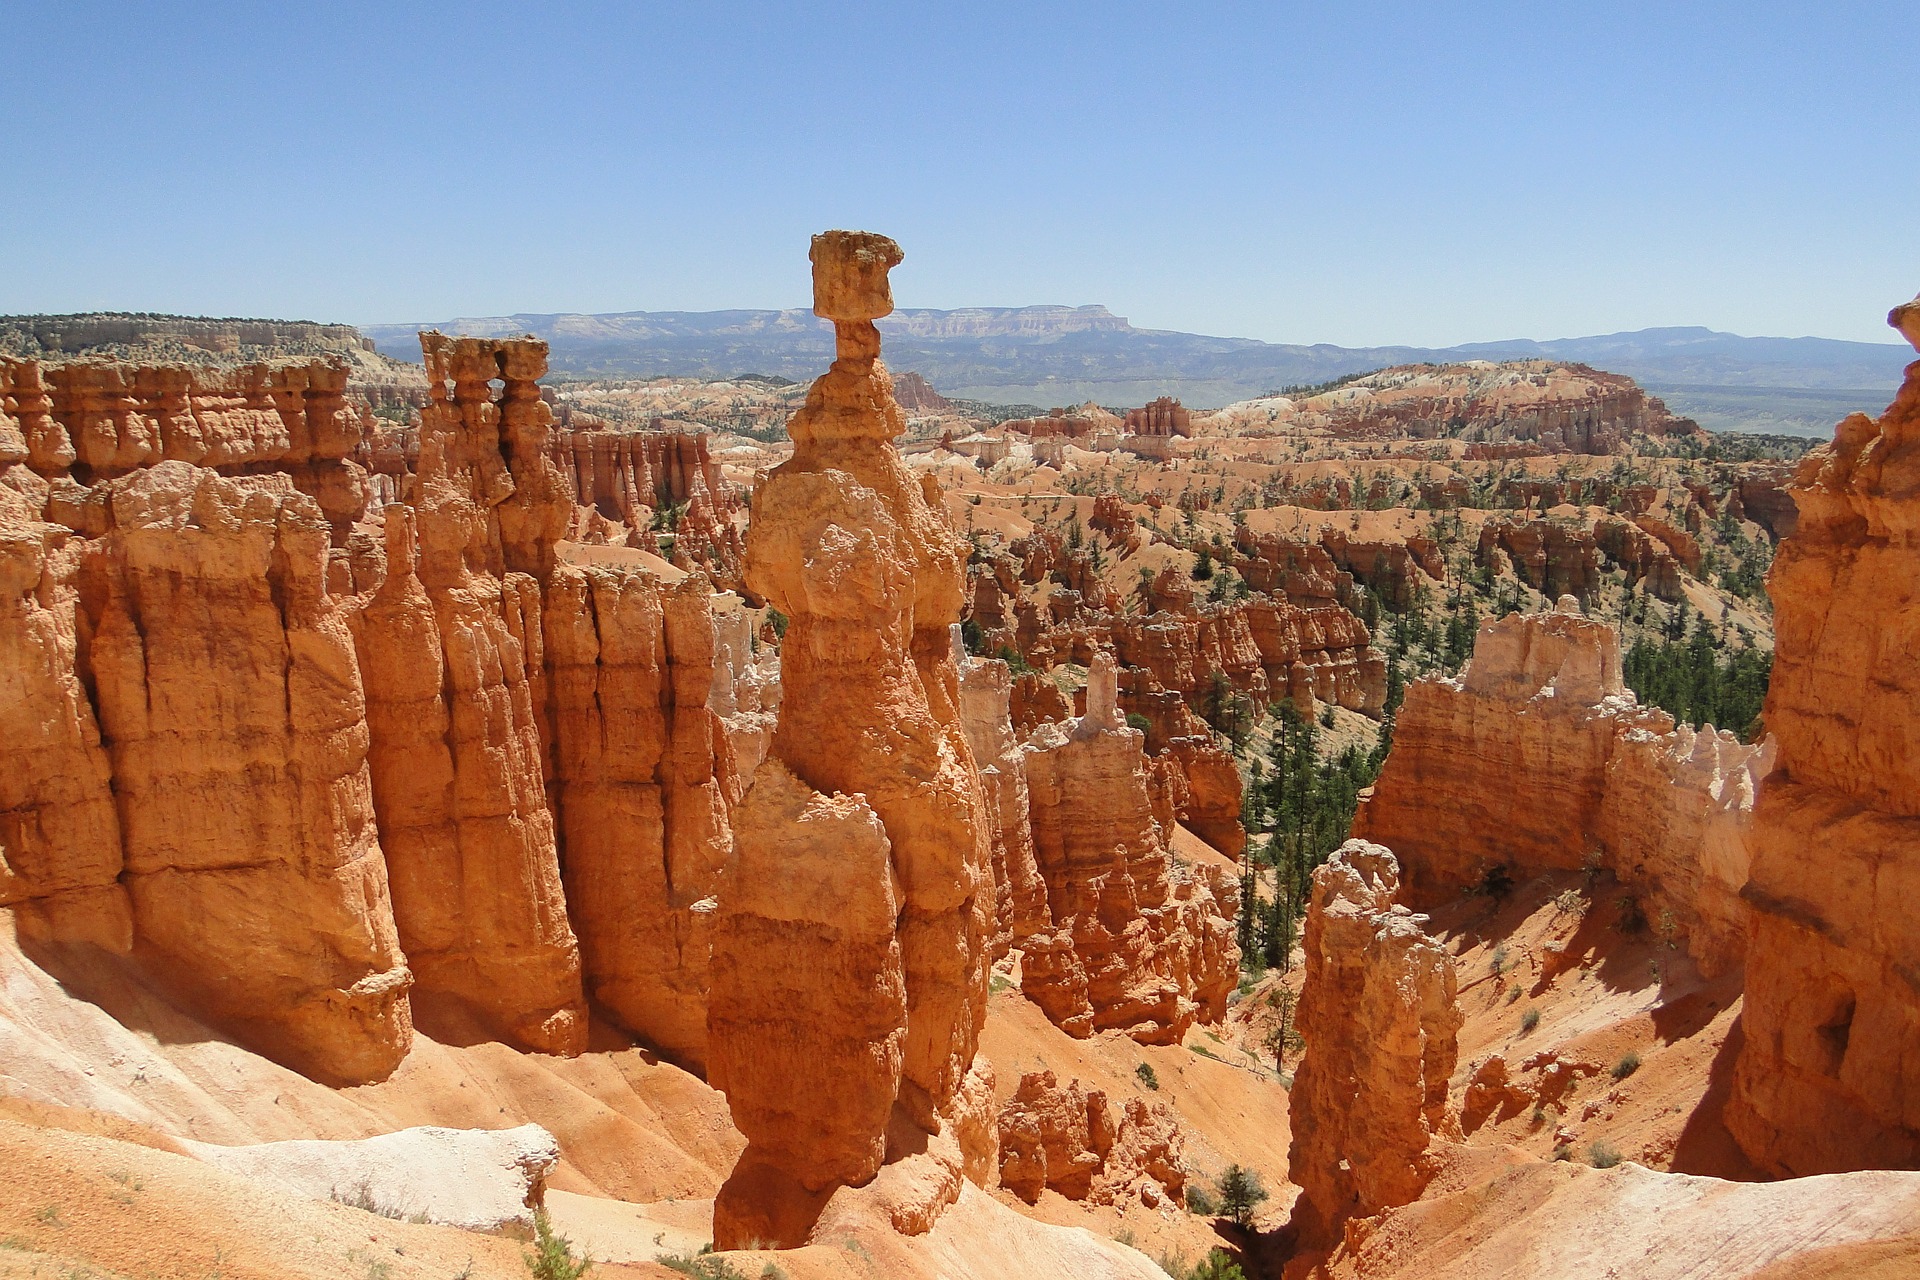 Beautiful Bryce Canyon — hoodoos towers in Bryce Canyon National Park.